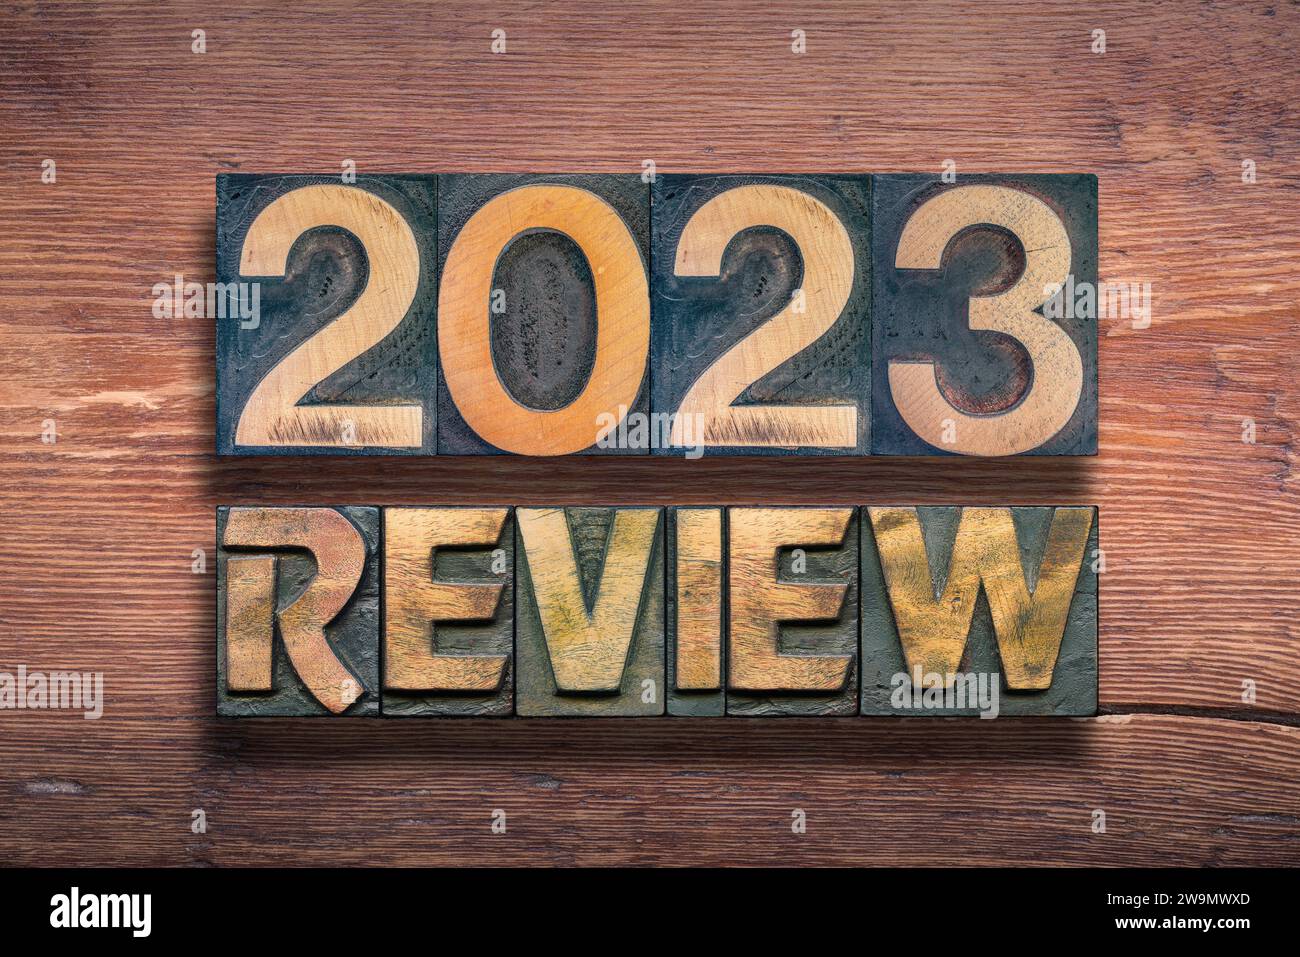 review 2023 combined from vintage letterpress on  varnished wooden surface Stock Photo